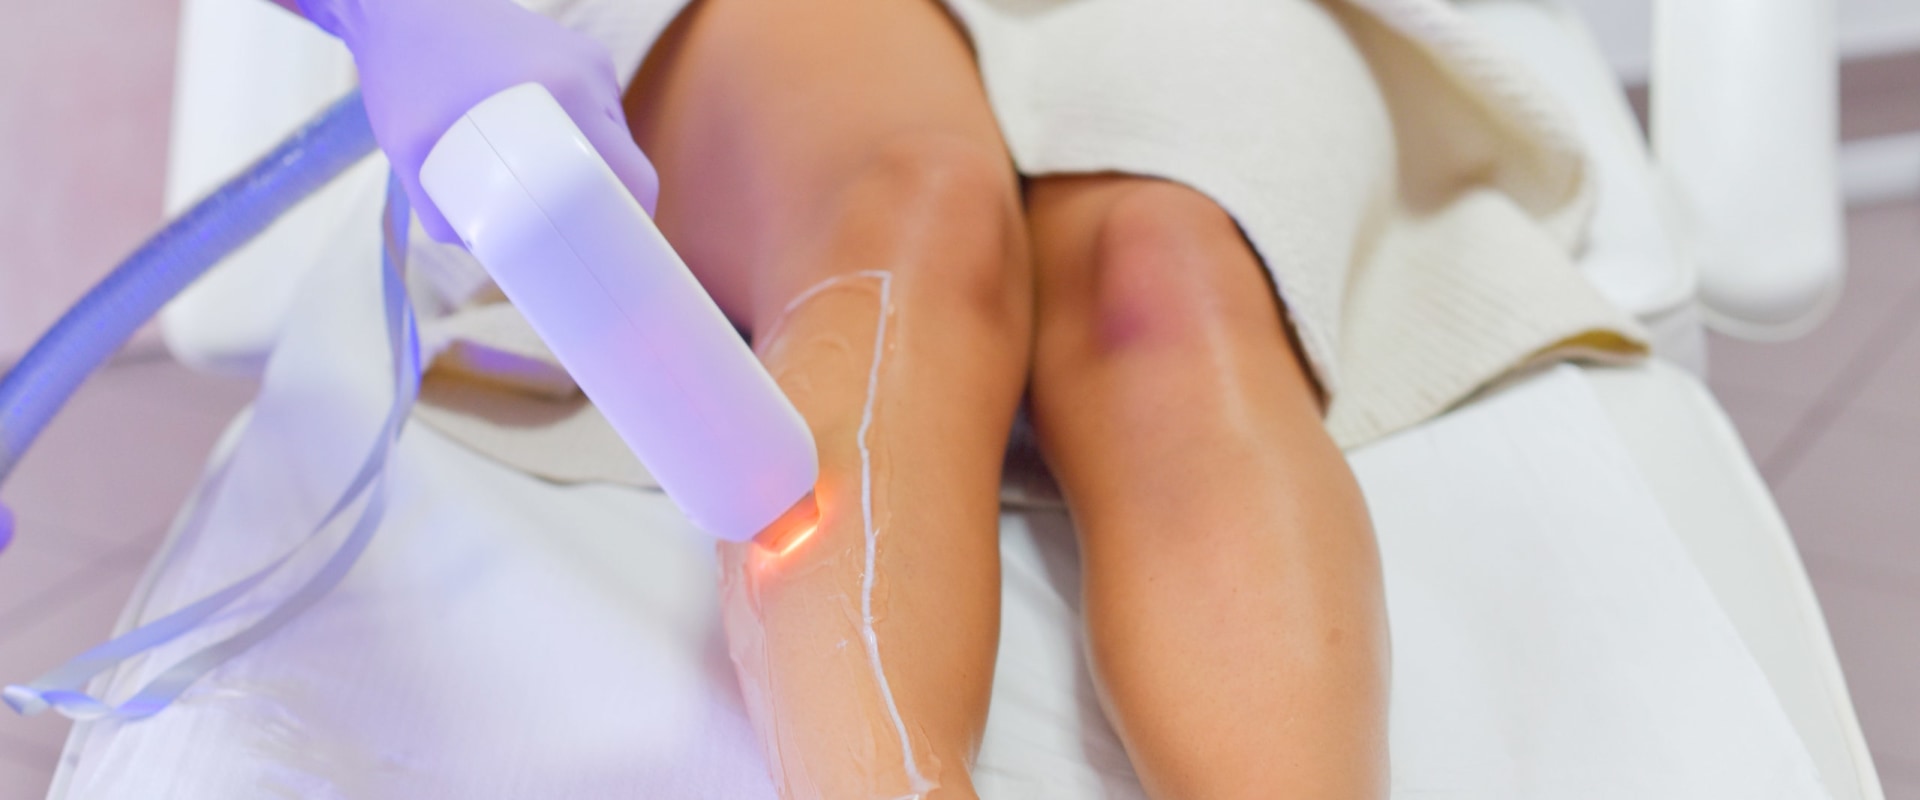 Can Laser Hair Removal be Done After Using Depilatory Creams?